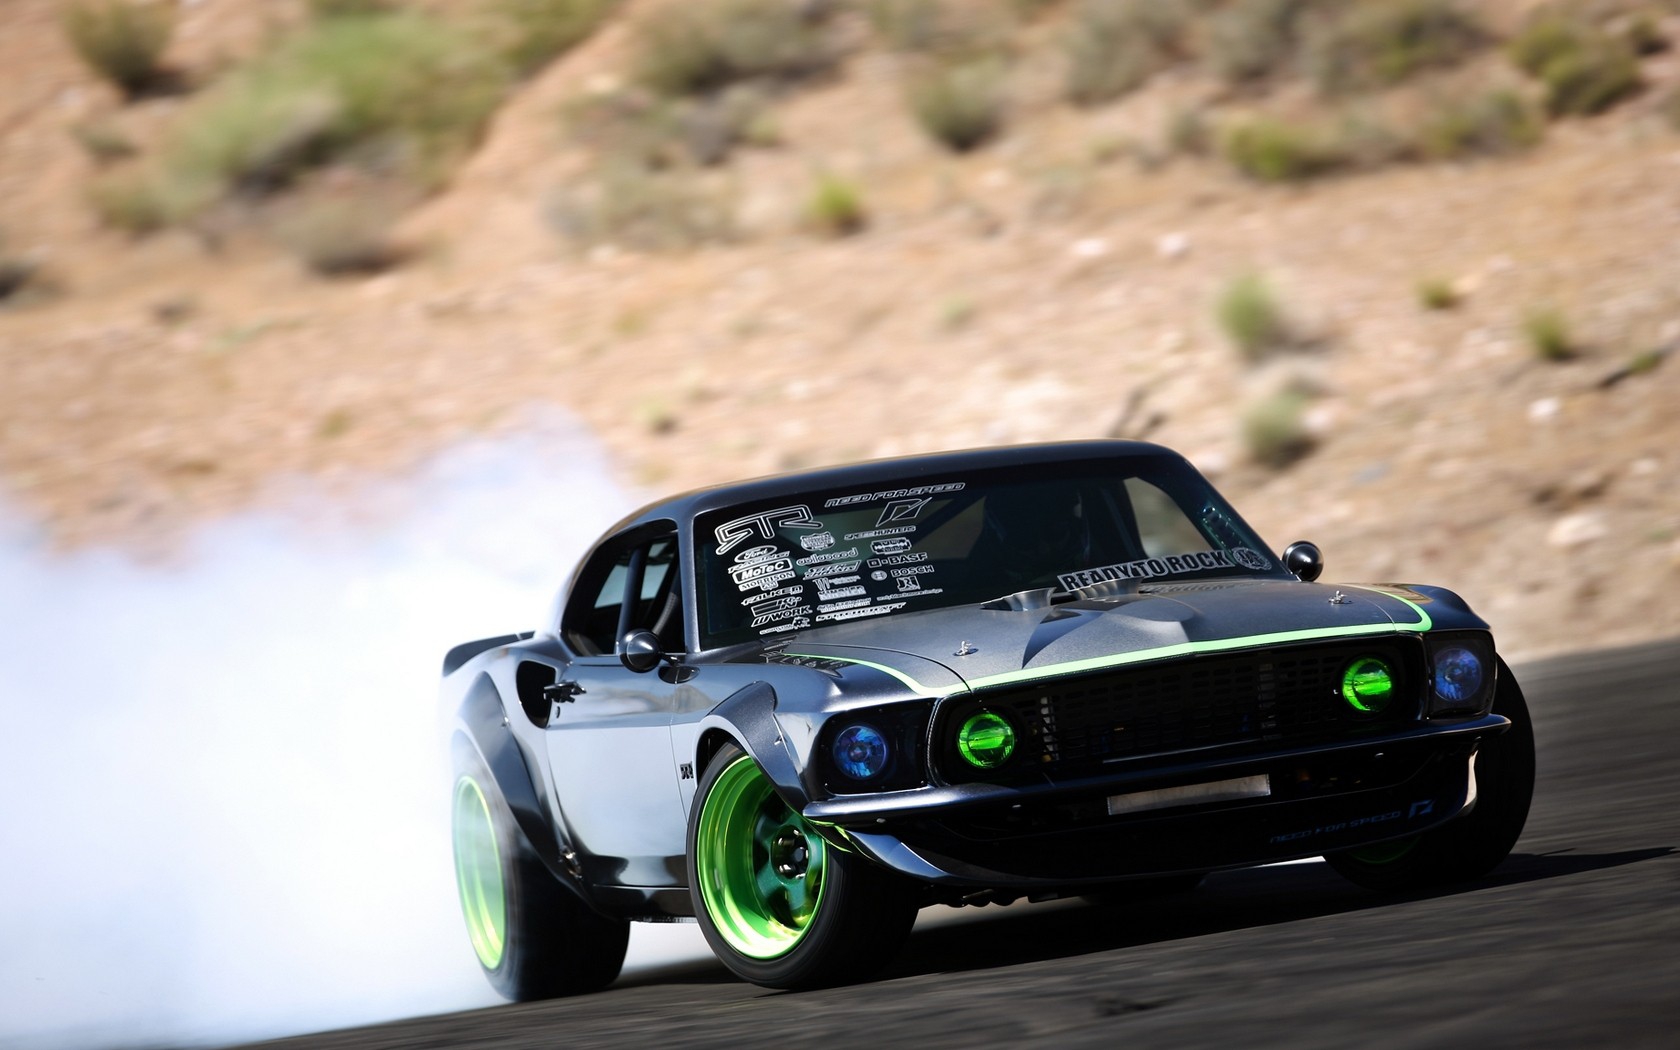 Download Wallpaper, Download 1680x1050 cars ford mustang drifting 1680x1050 wallpaper Wallpaper –Free Wallpaper Download